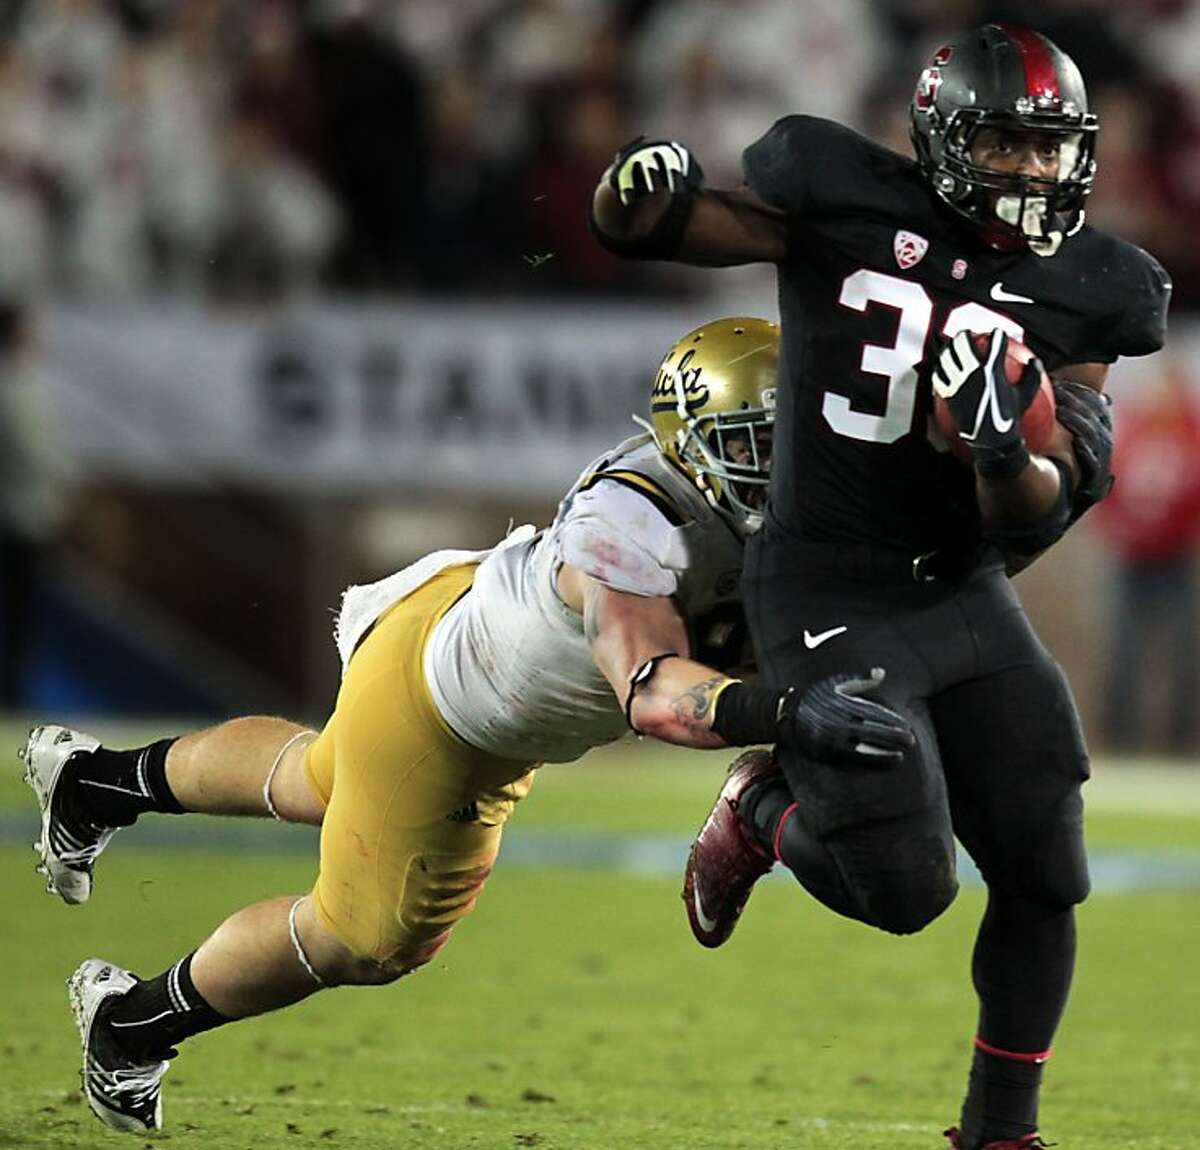 Stanford Stepfan Taylor escapes a tackle for a 33 yard gain in the first quarter Friday Nov. 30, 2012, in the Pack 12 championship game with UCLA in Stanford, Calif.